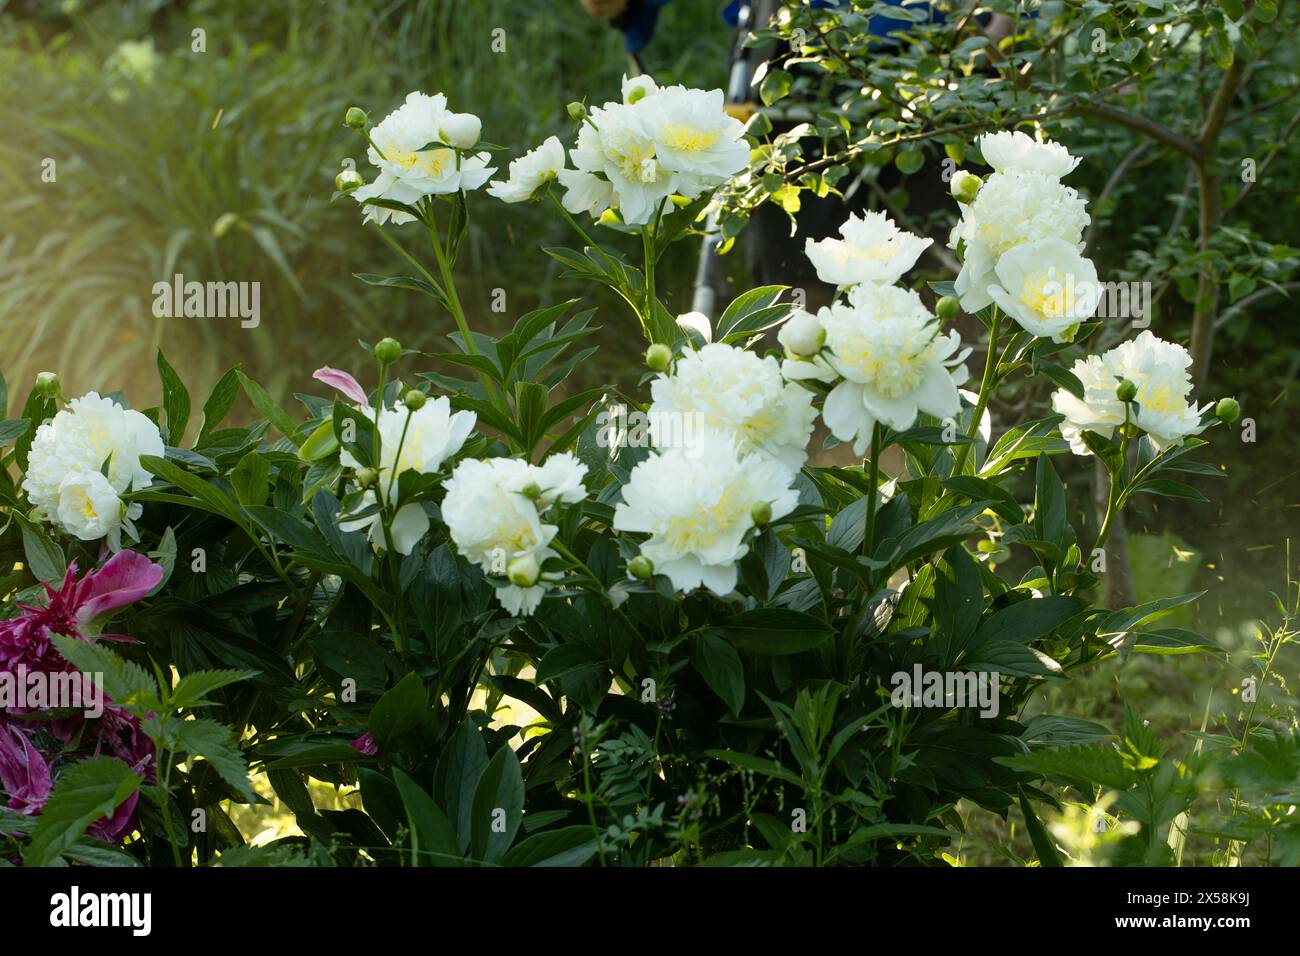 Blooming bush of bomb-shaped white and yellow peonies in the garden. High quality photo Stock Photo